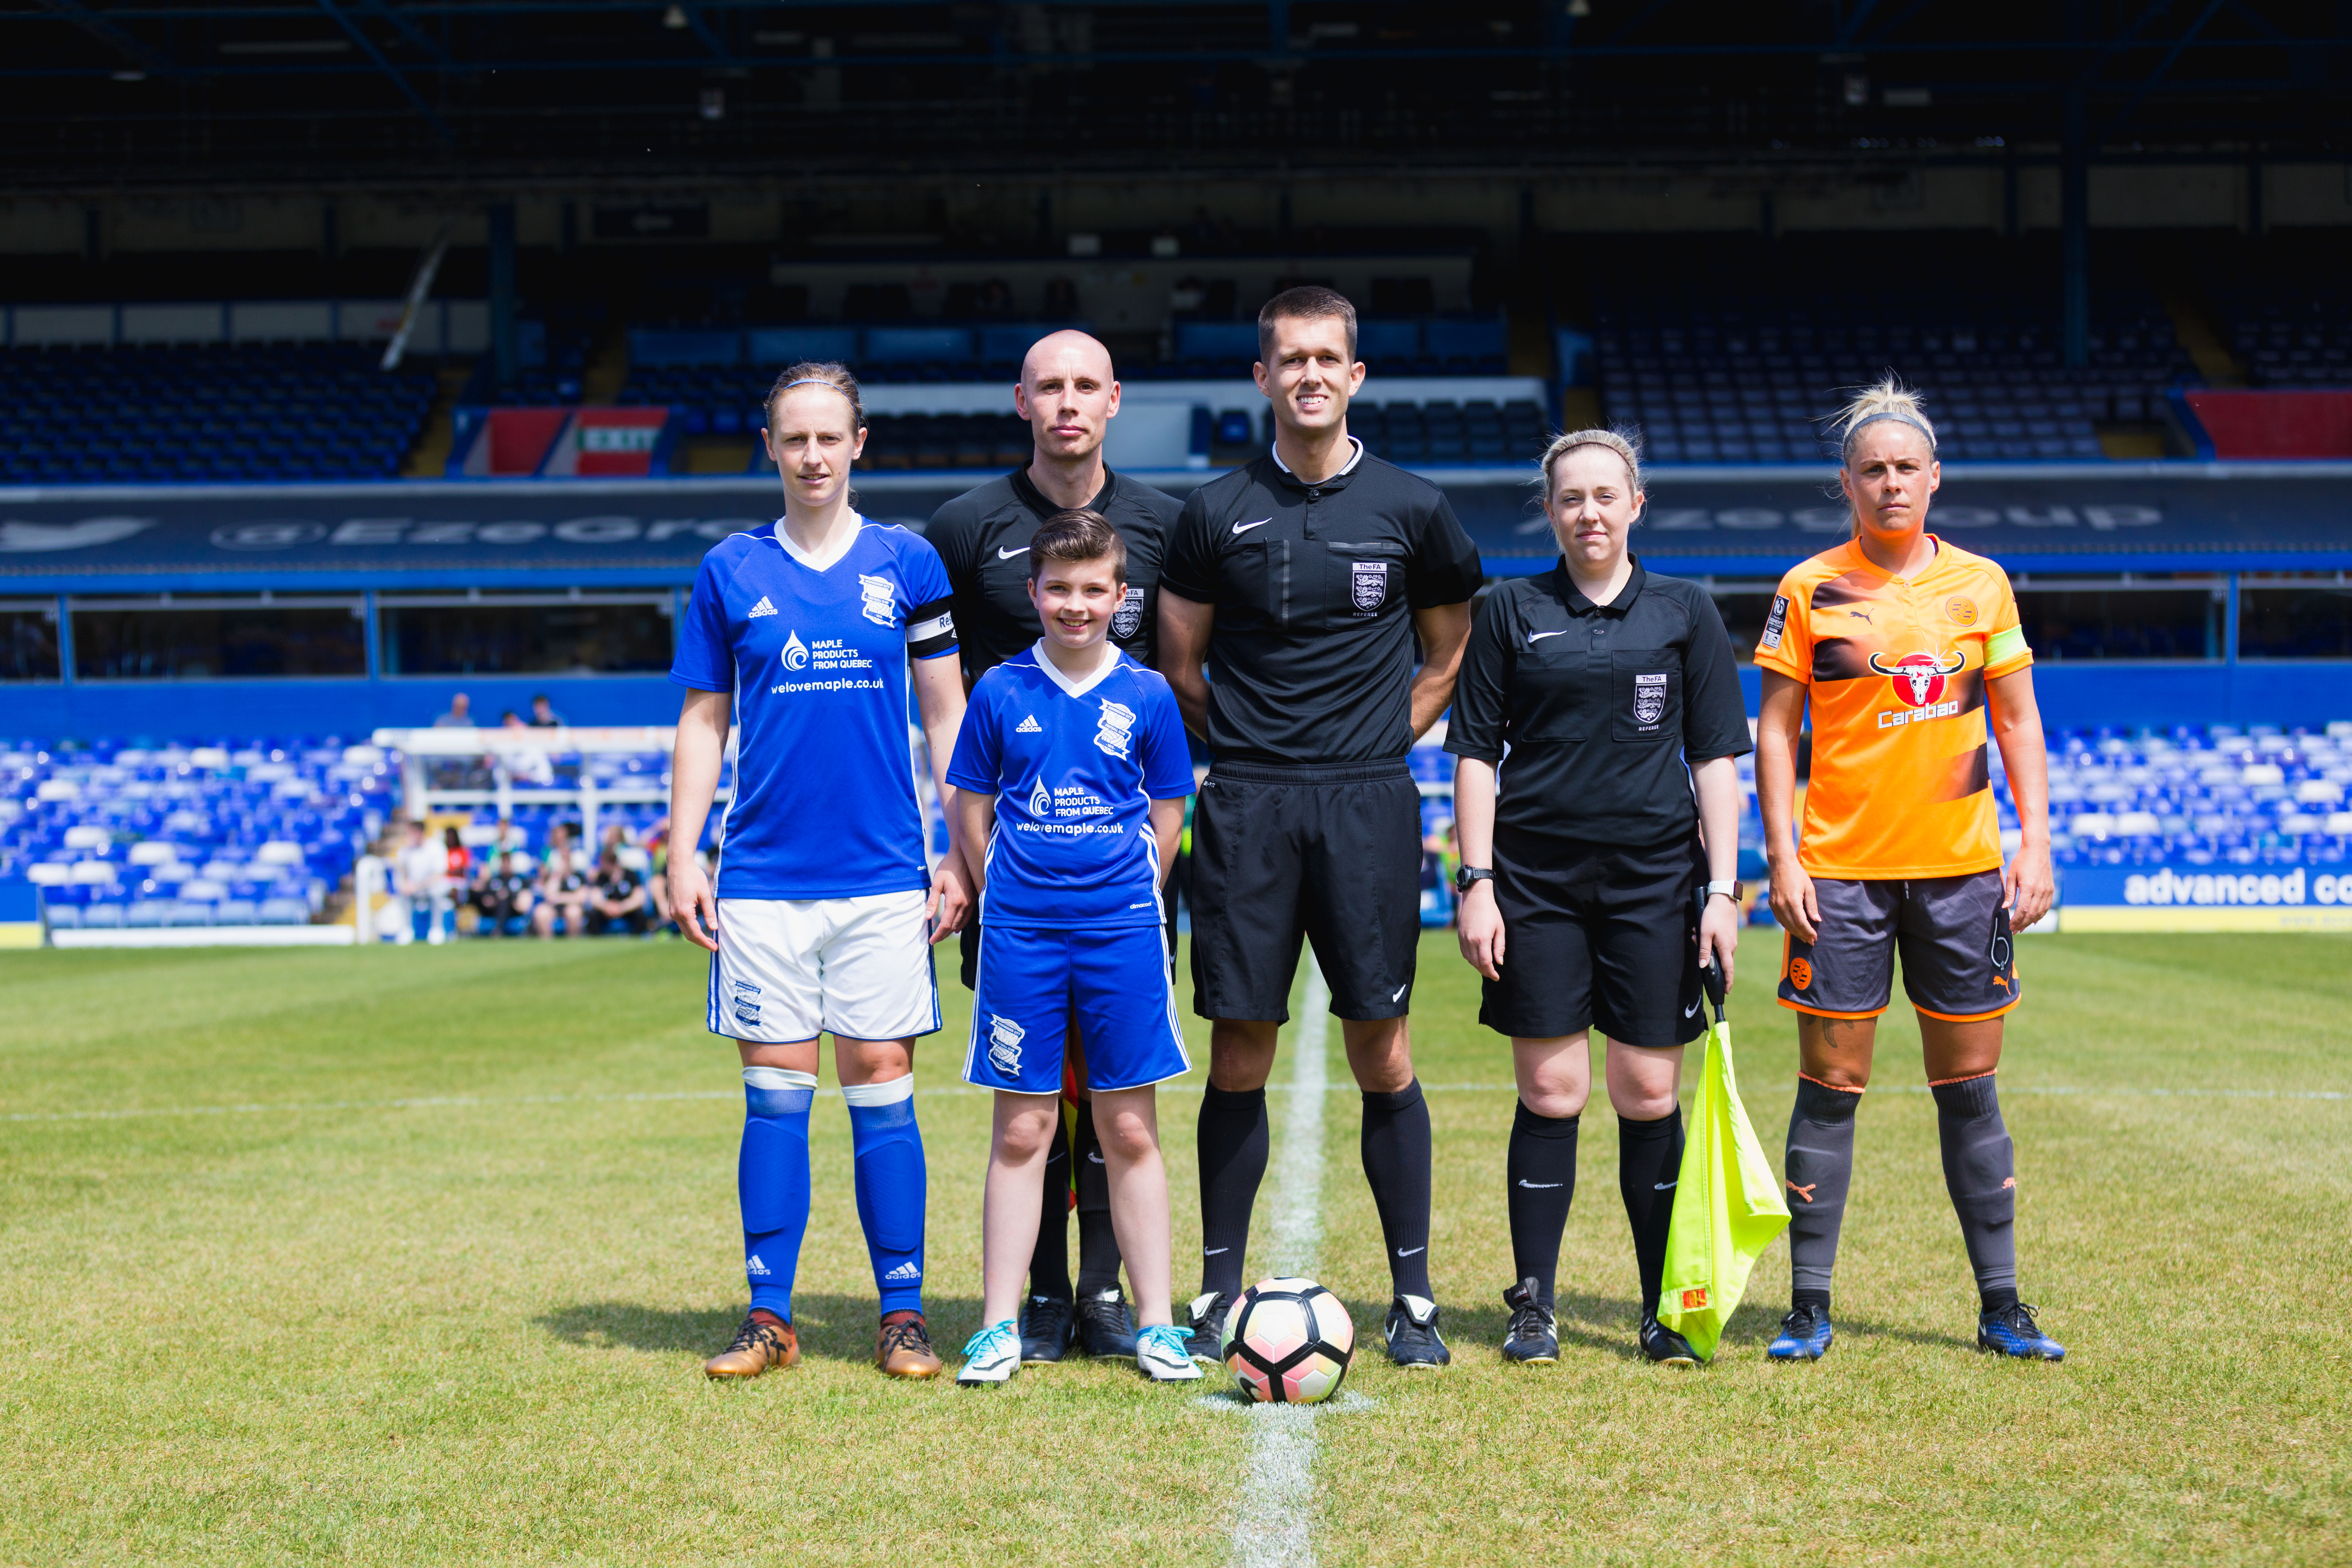 competition winner, Millie Jenkins-Caley, with the refs and team captains